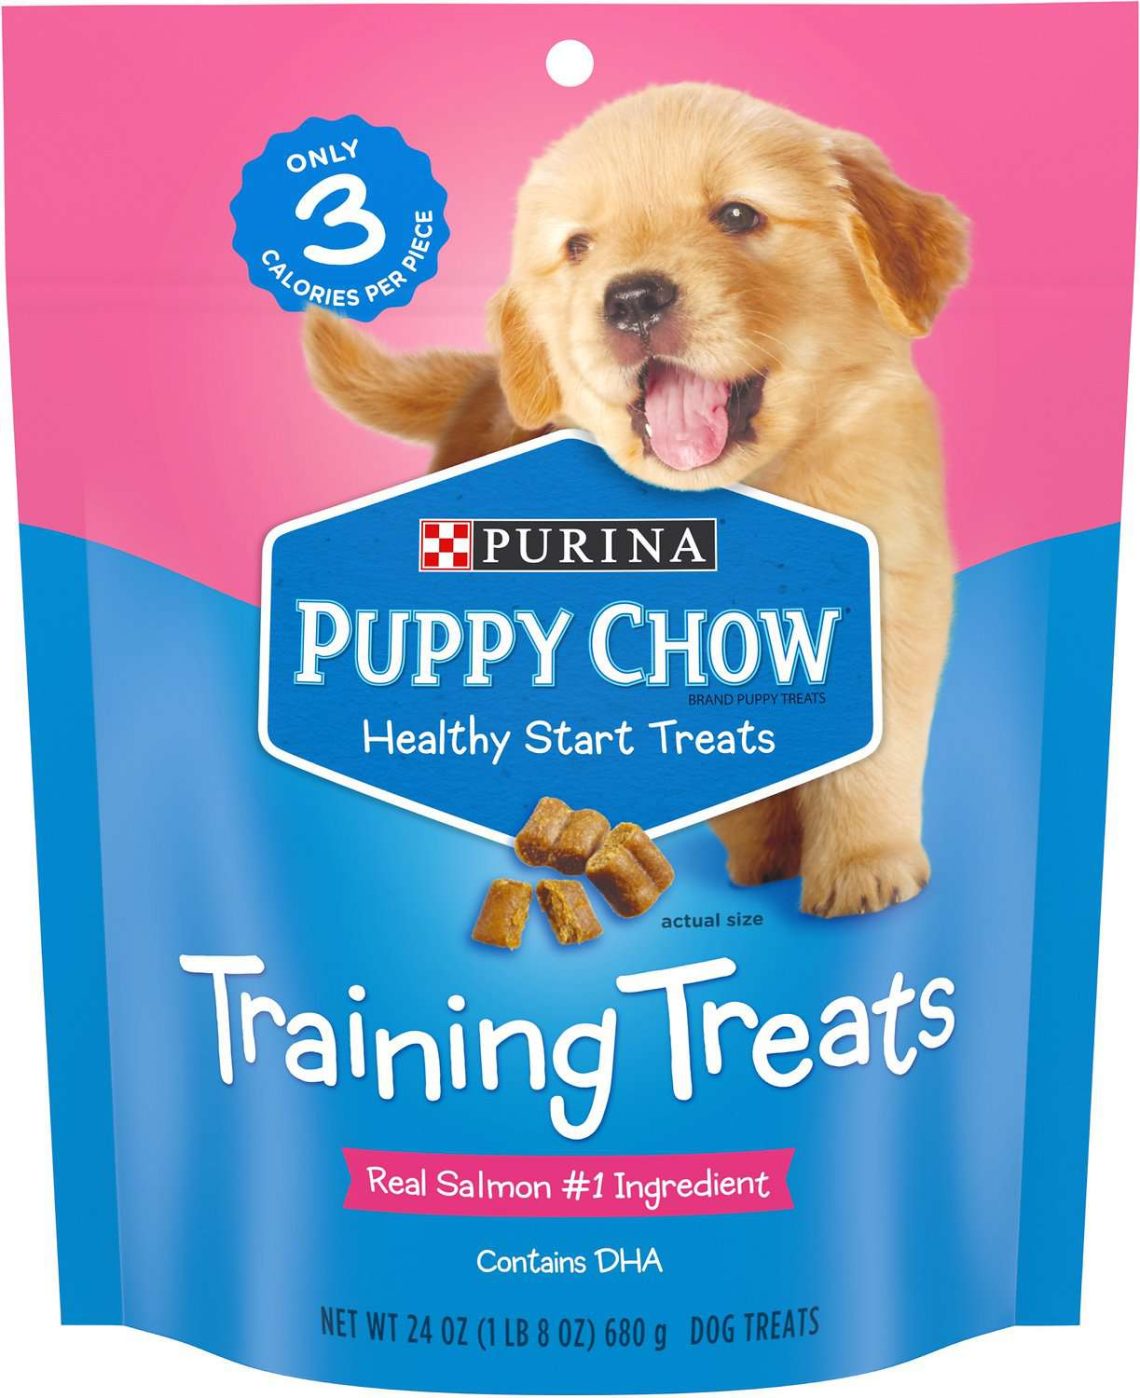 What treat to give a puppy